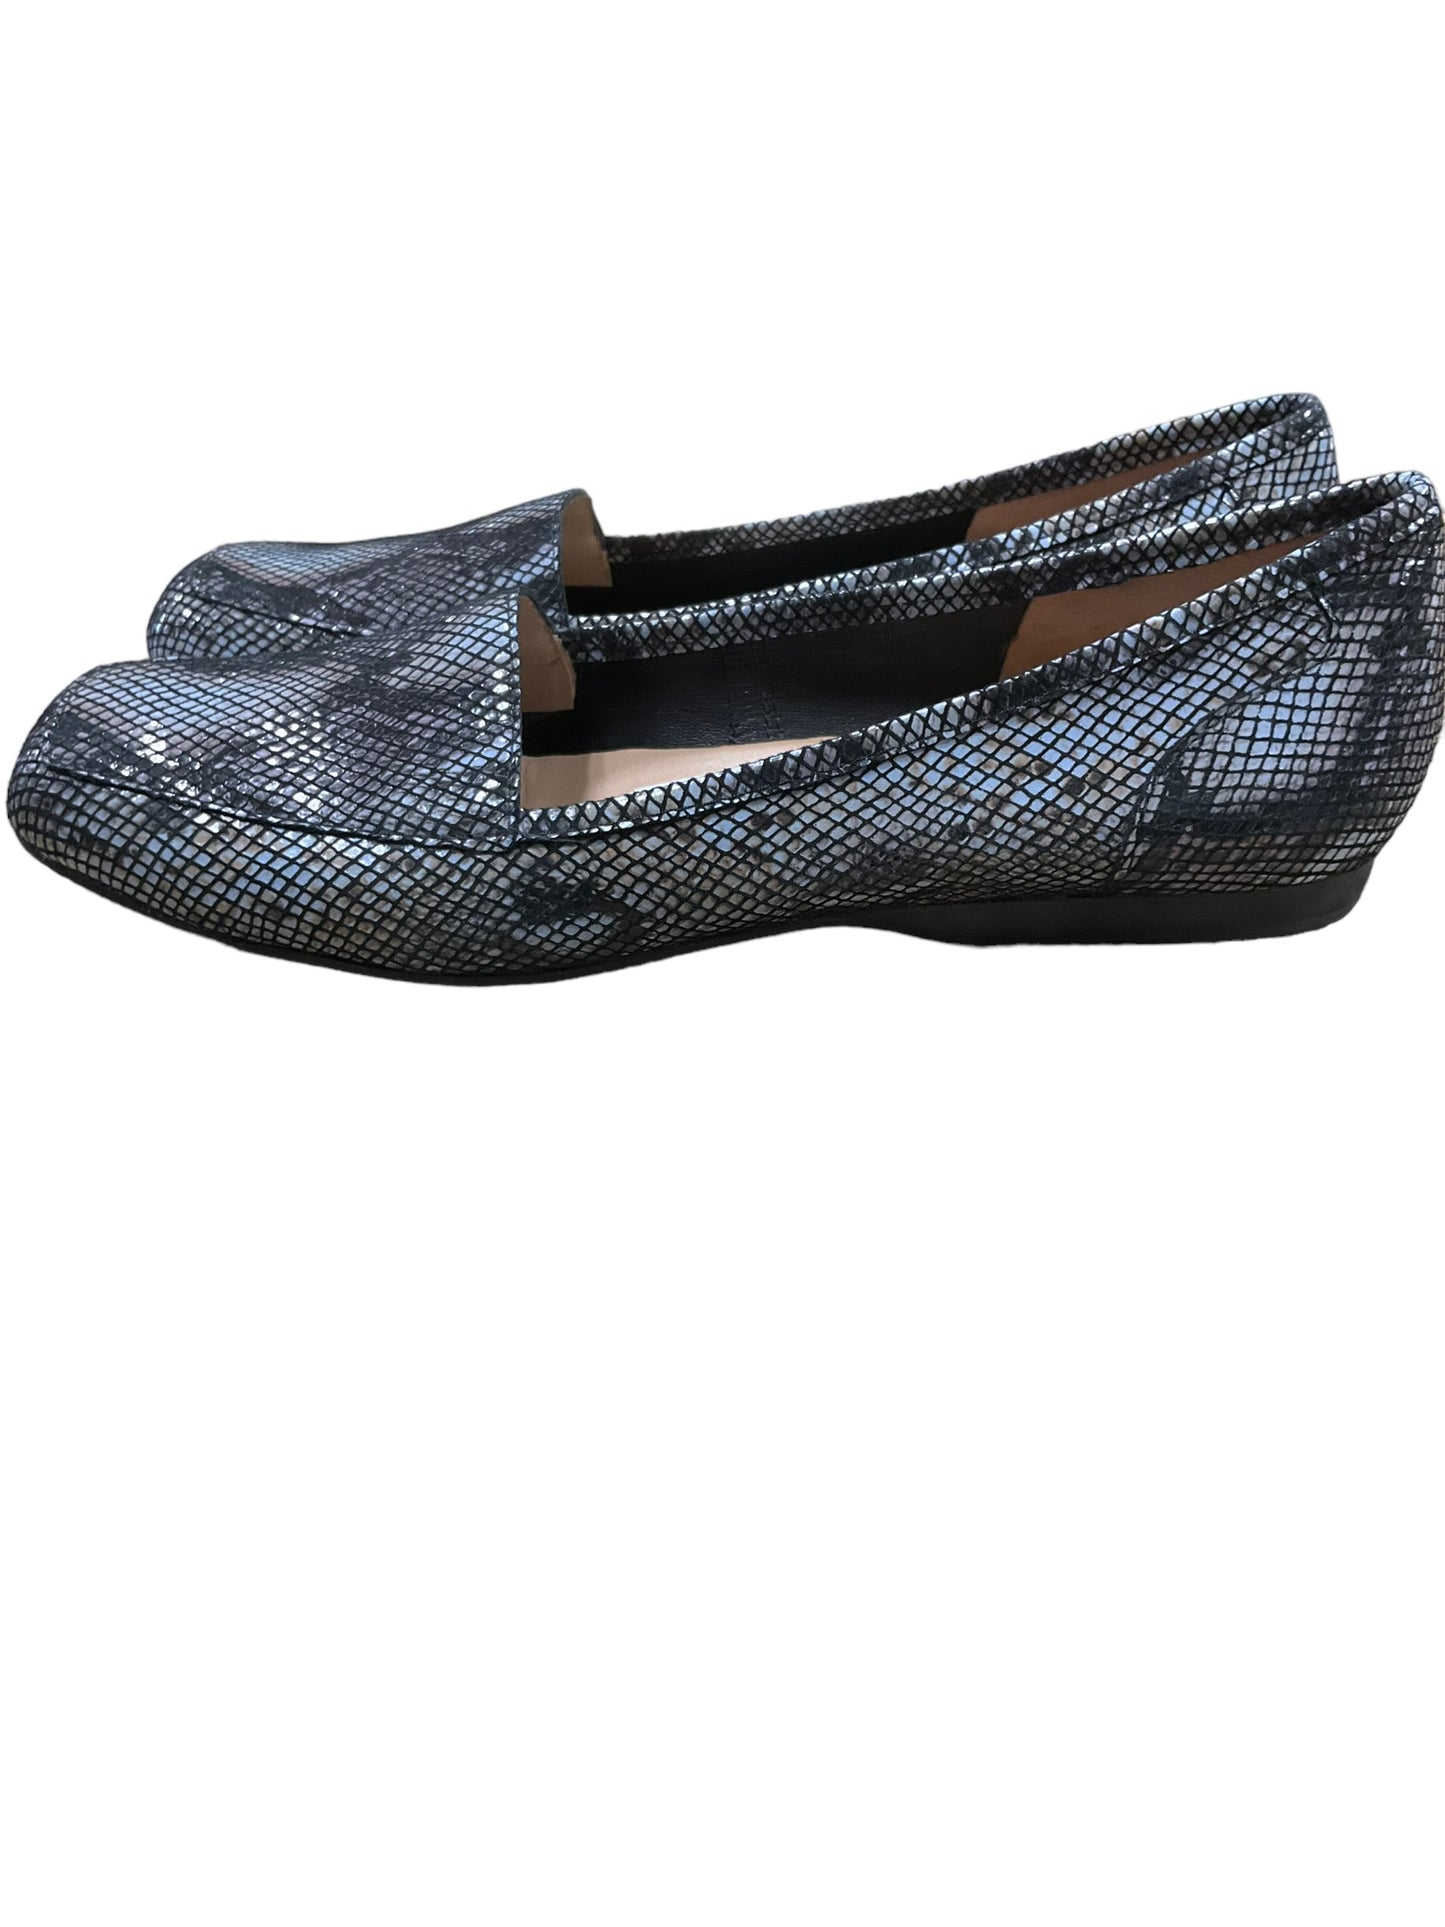 Shoes Flats Ballet By Clothes Mentor  Size: 8